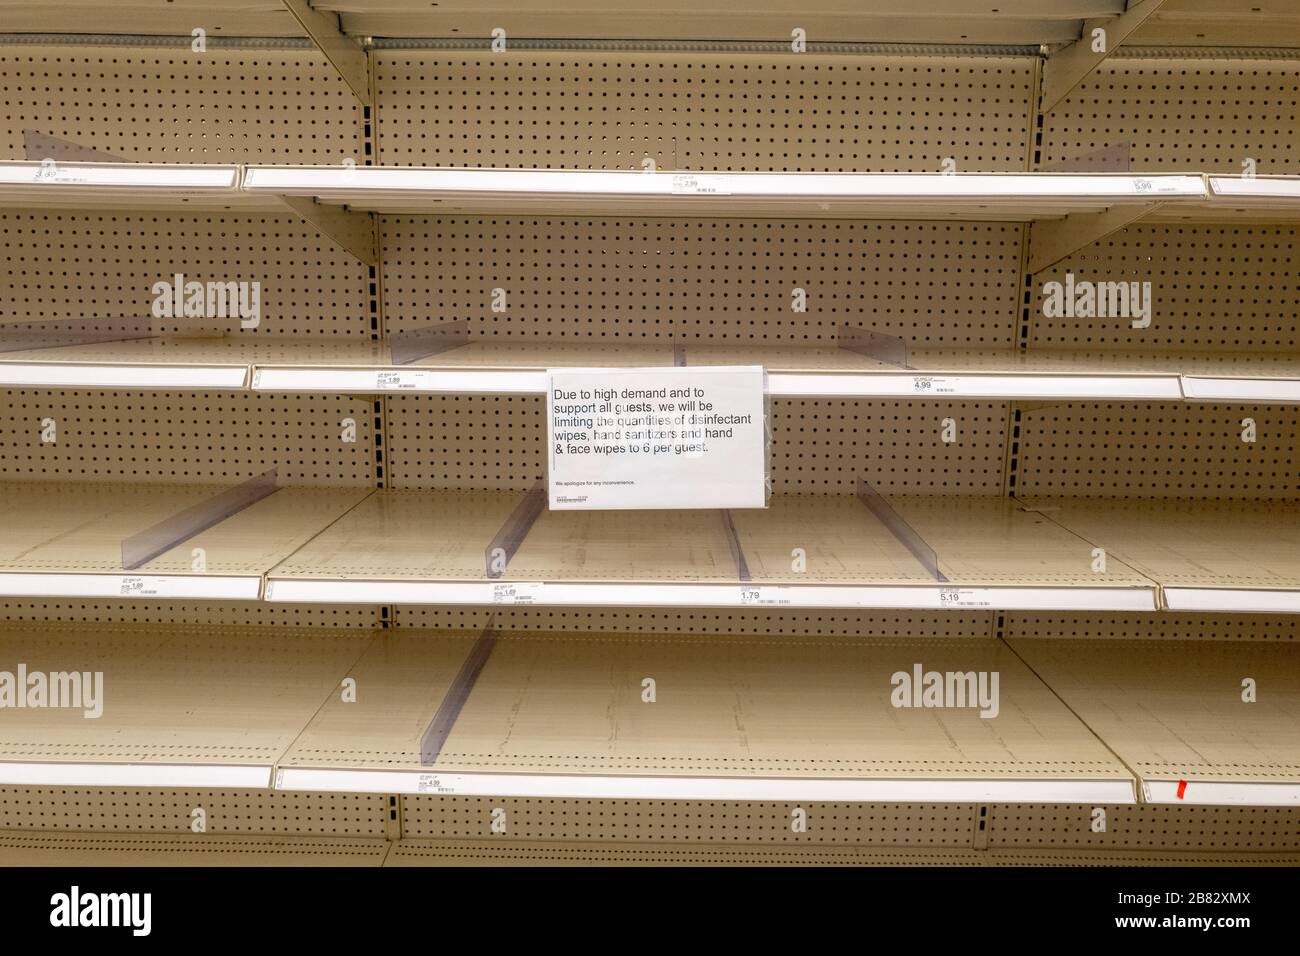 Empty shelves and a sign regarding product rationing are visible at a Target retail store in Contra Costa County, San Ramon, California, as residents purchase all available stock of toilet paper, paper towels, canned goods, hand sanitizer and other essential items during an outbreak of the COVID-19 coronavirus, March 12, 2020. () Stock Photo